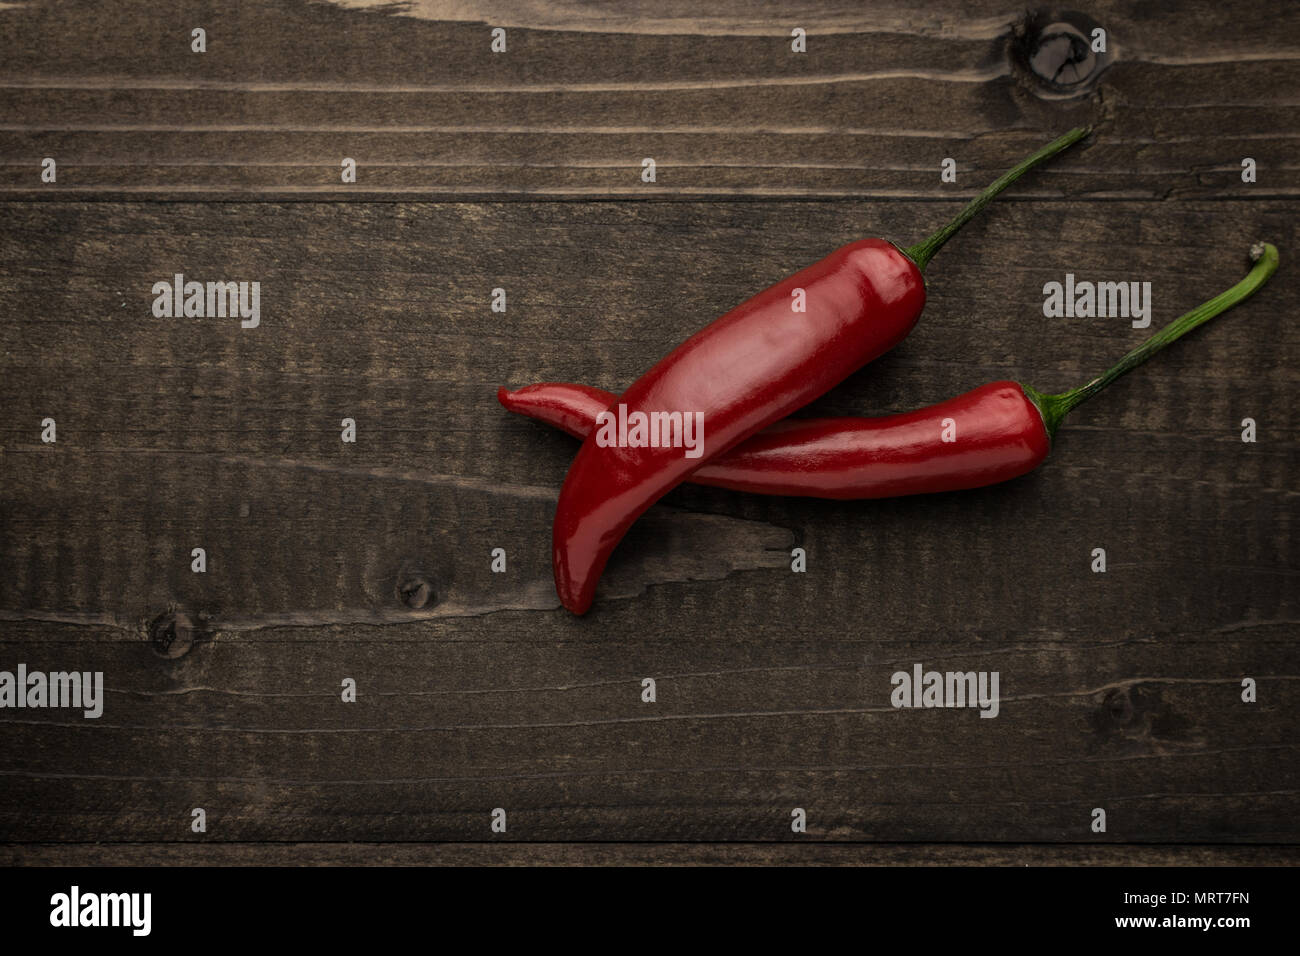 Red Hot Chili Peppers on Rustic Wooden Background Stock Photo